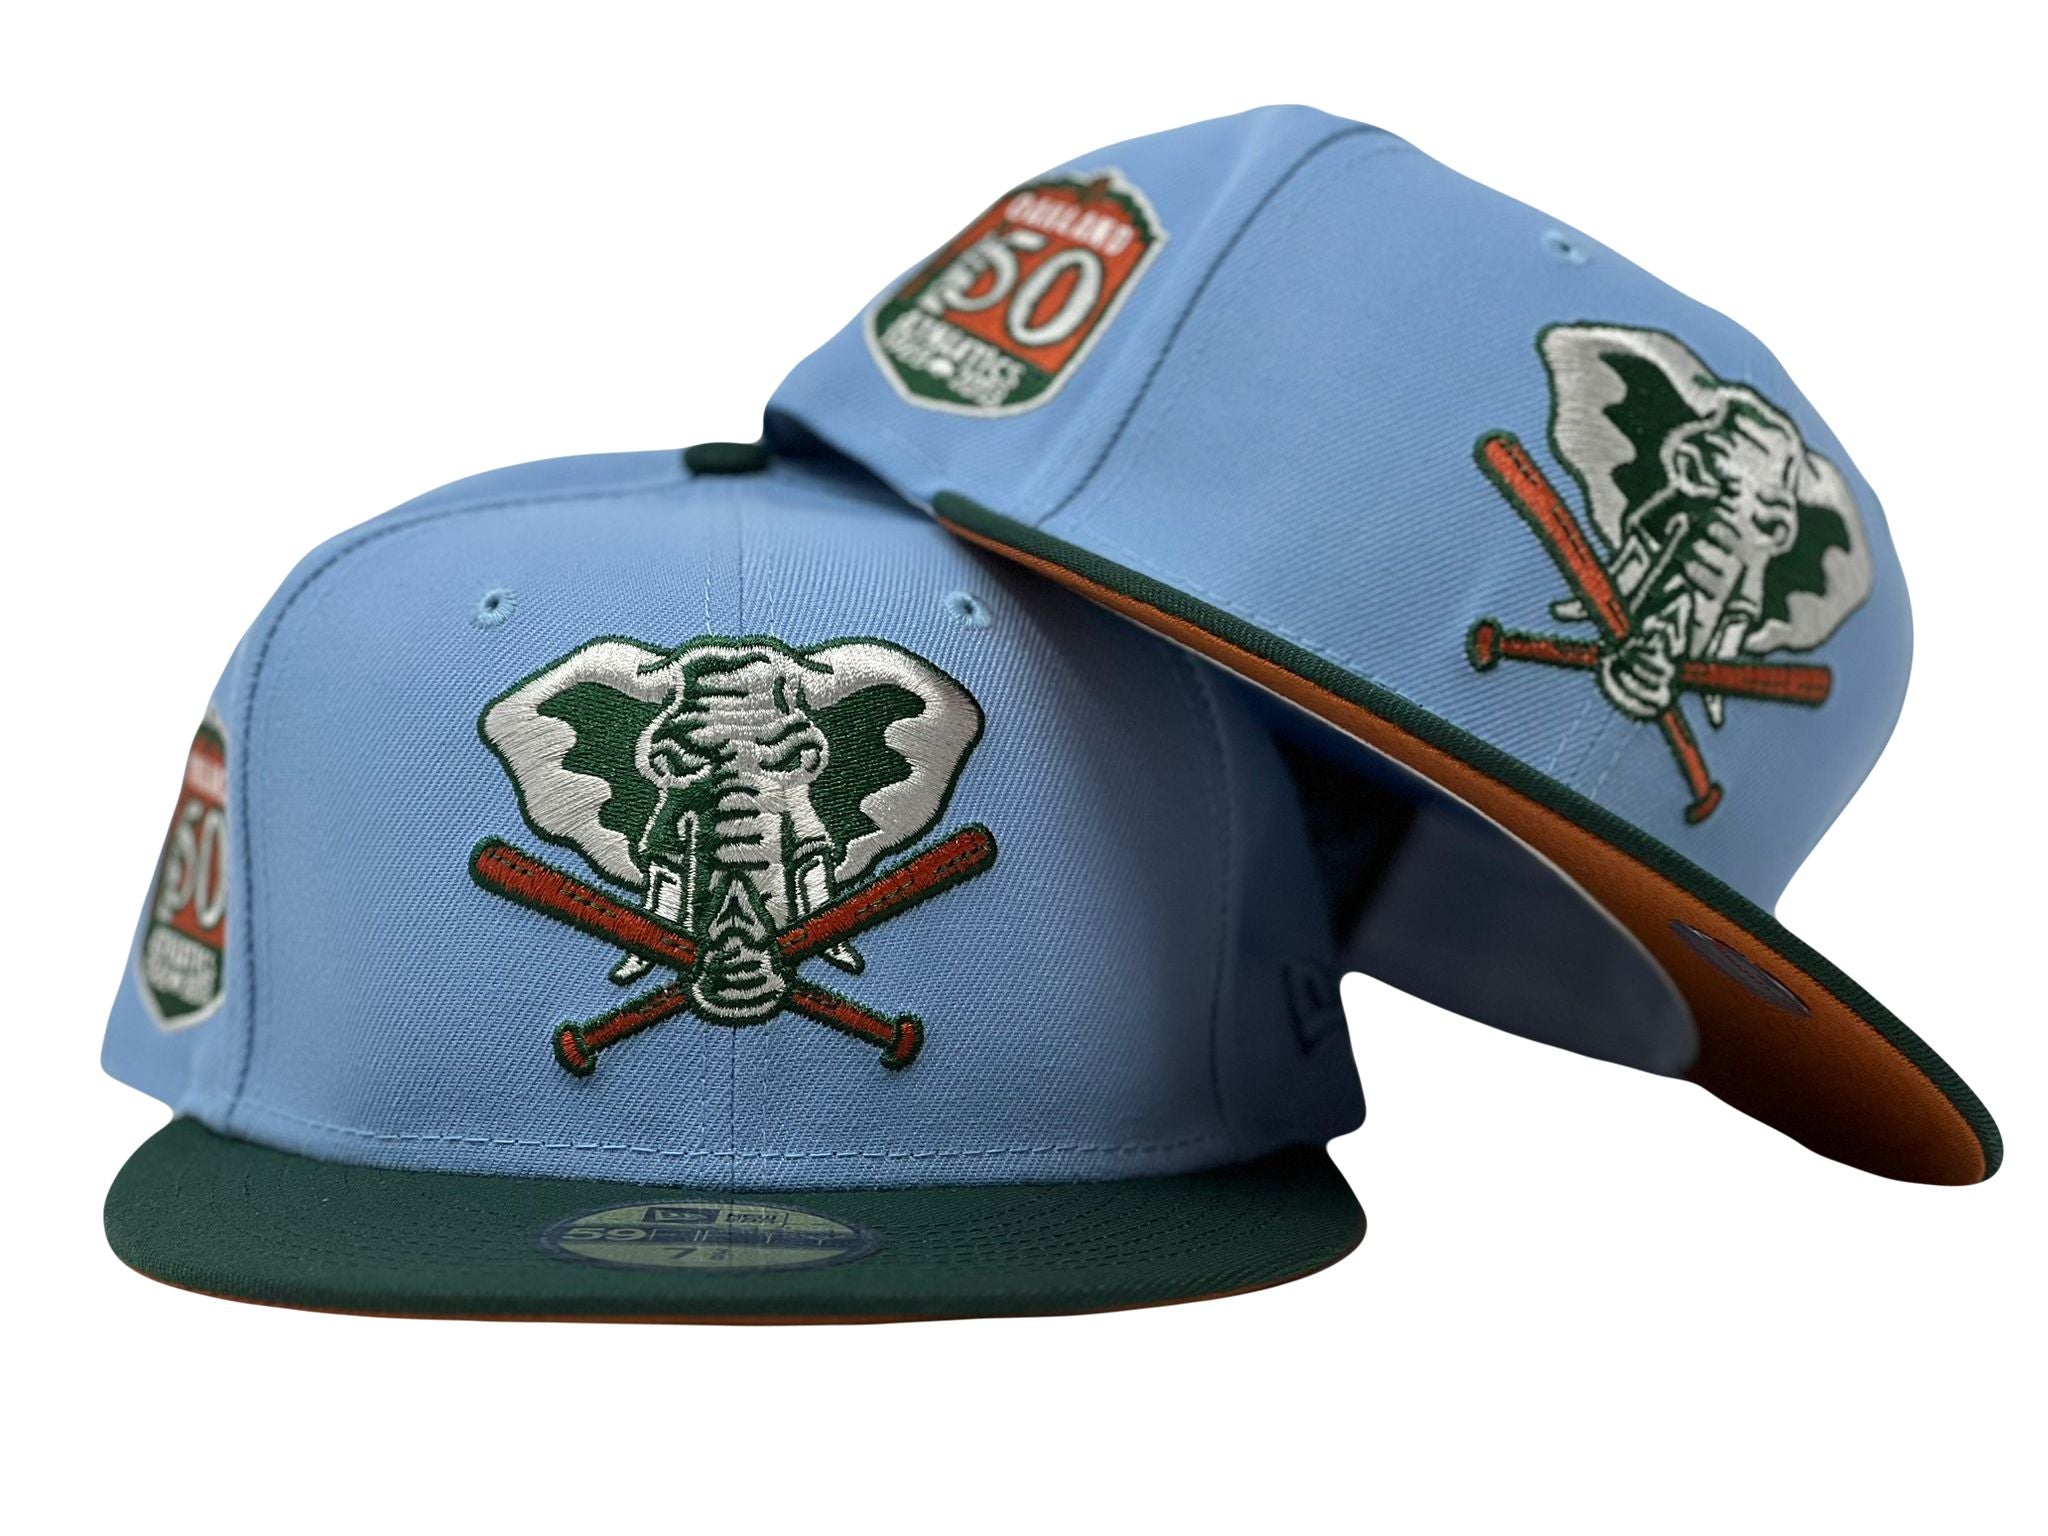 Oakland Athletics hat  Outfits with hats, Clothes design, Hat shop